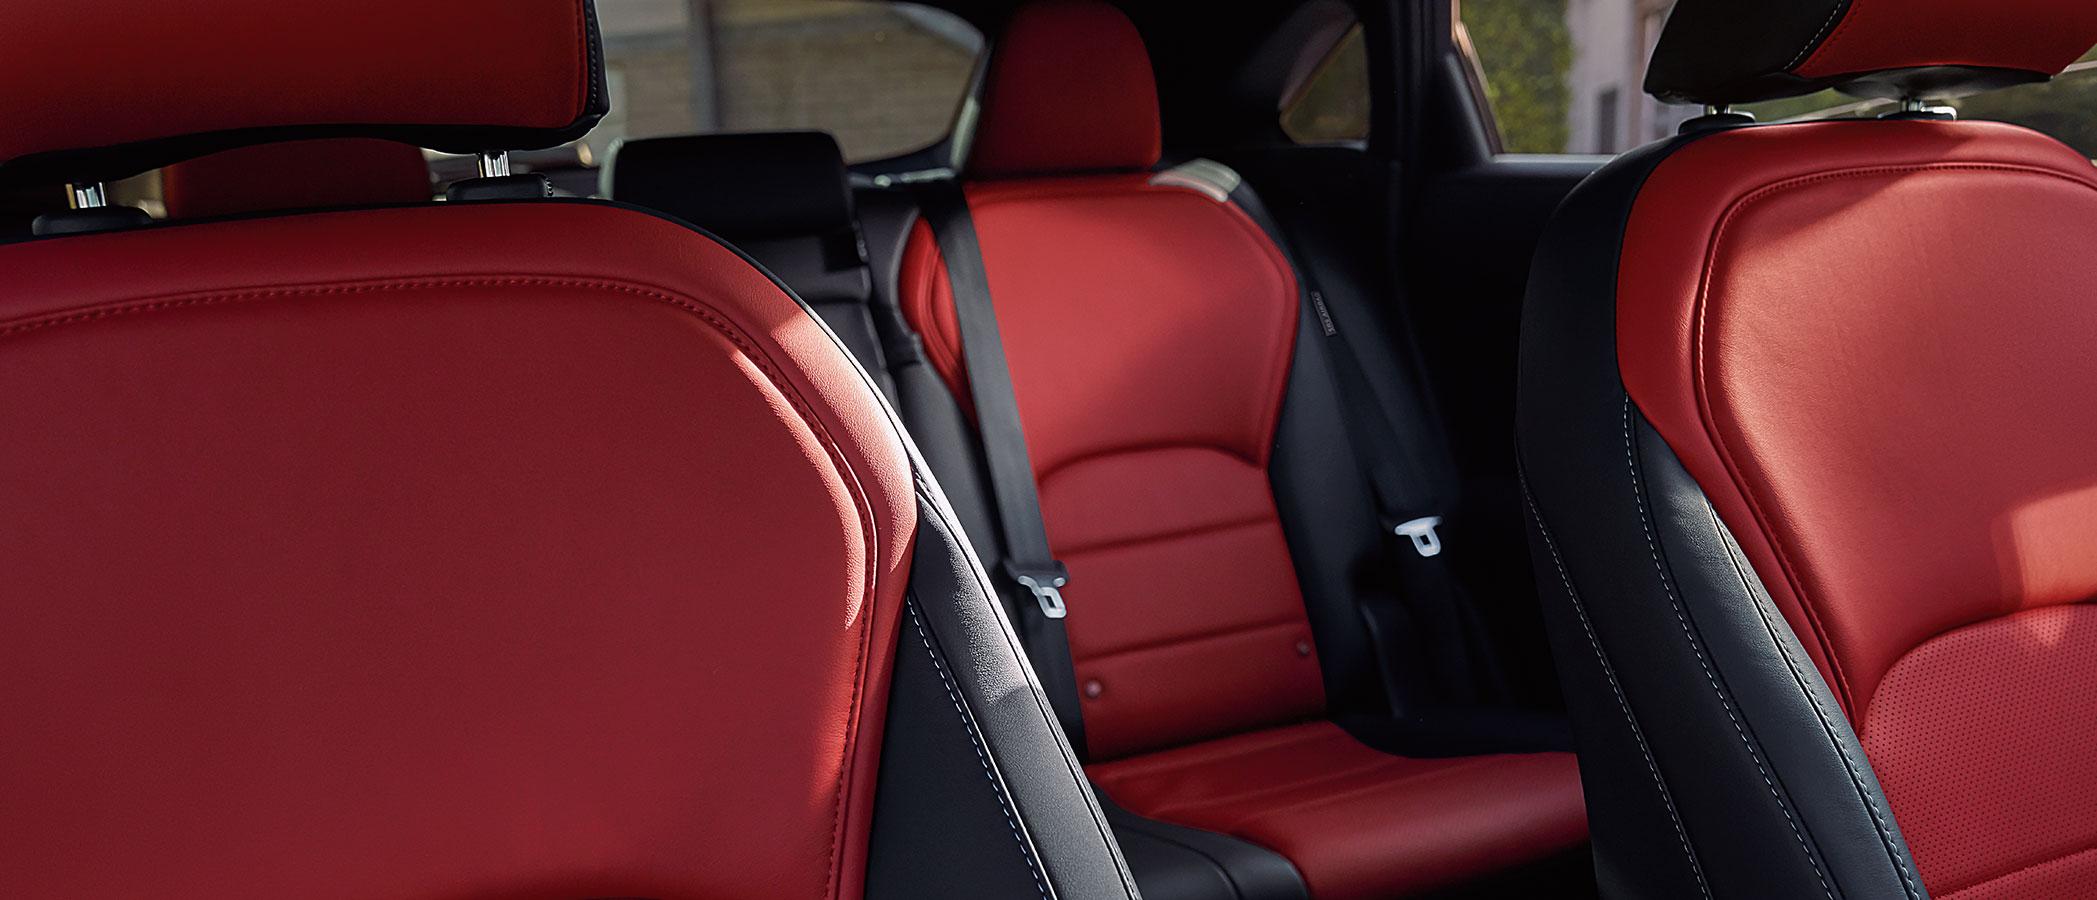 Interior view of the INFINITI QX55 featuring black upholstery with Monaco red accents.